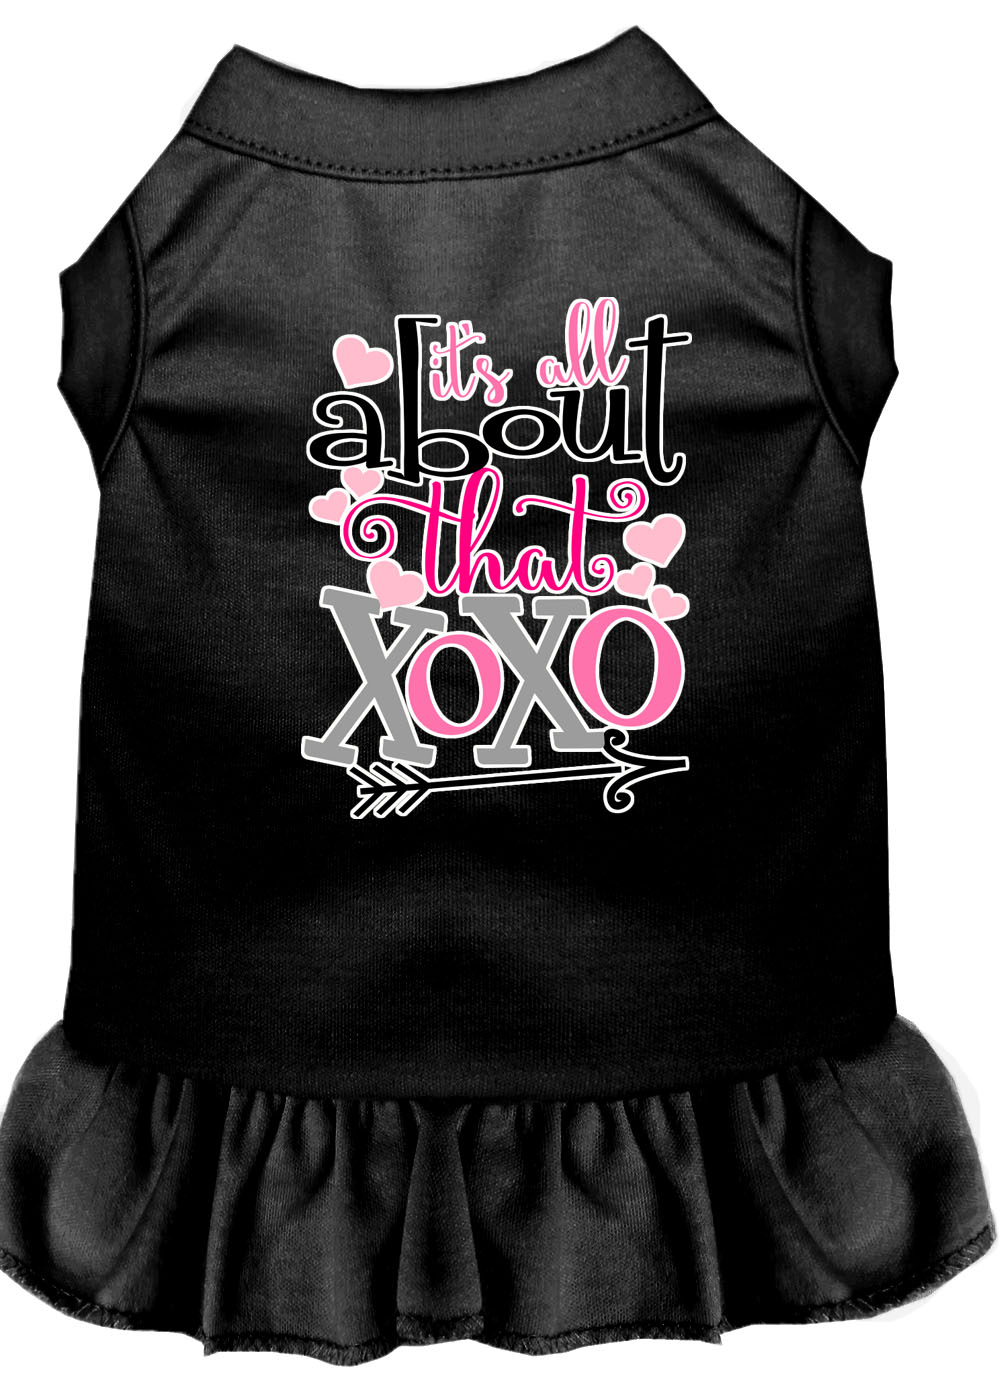 All about the XOXO Screen Print Dog Dress Black Lg